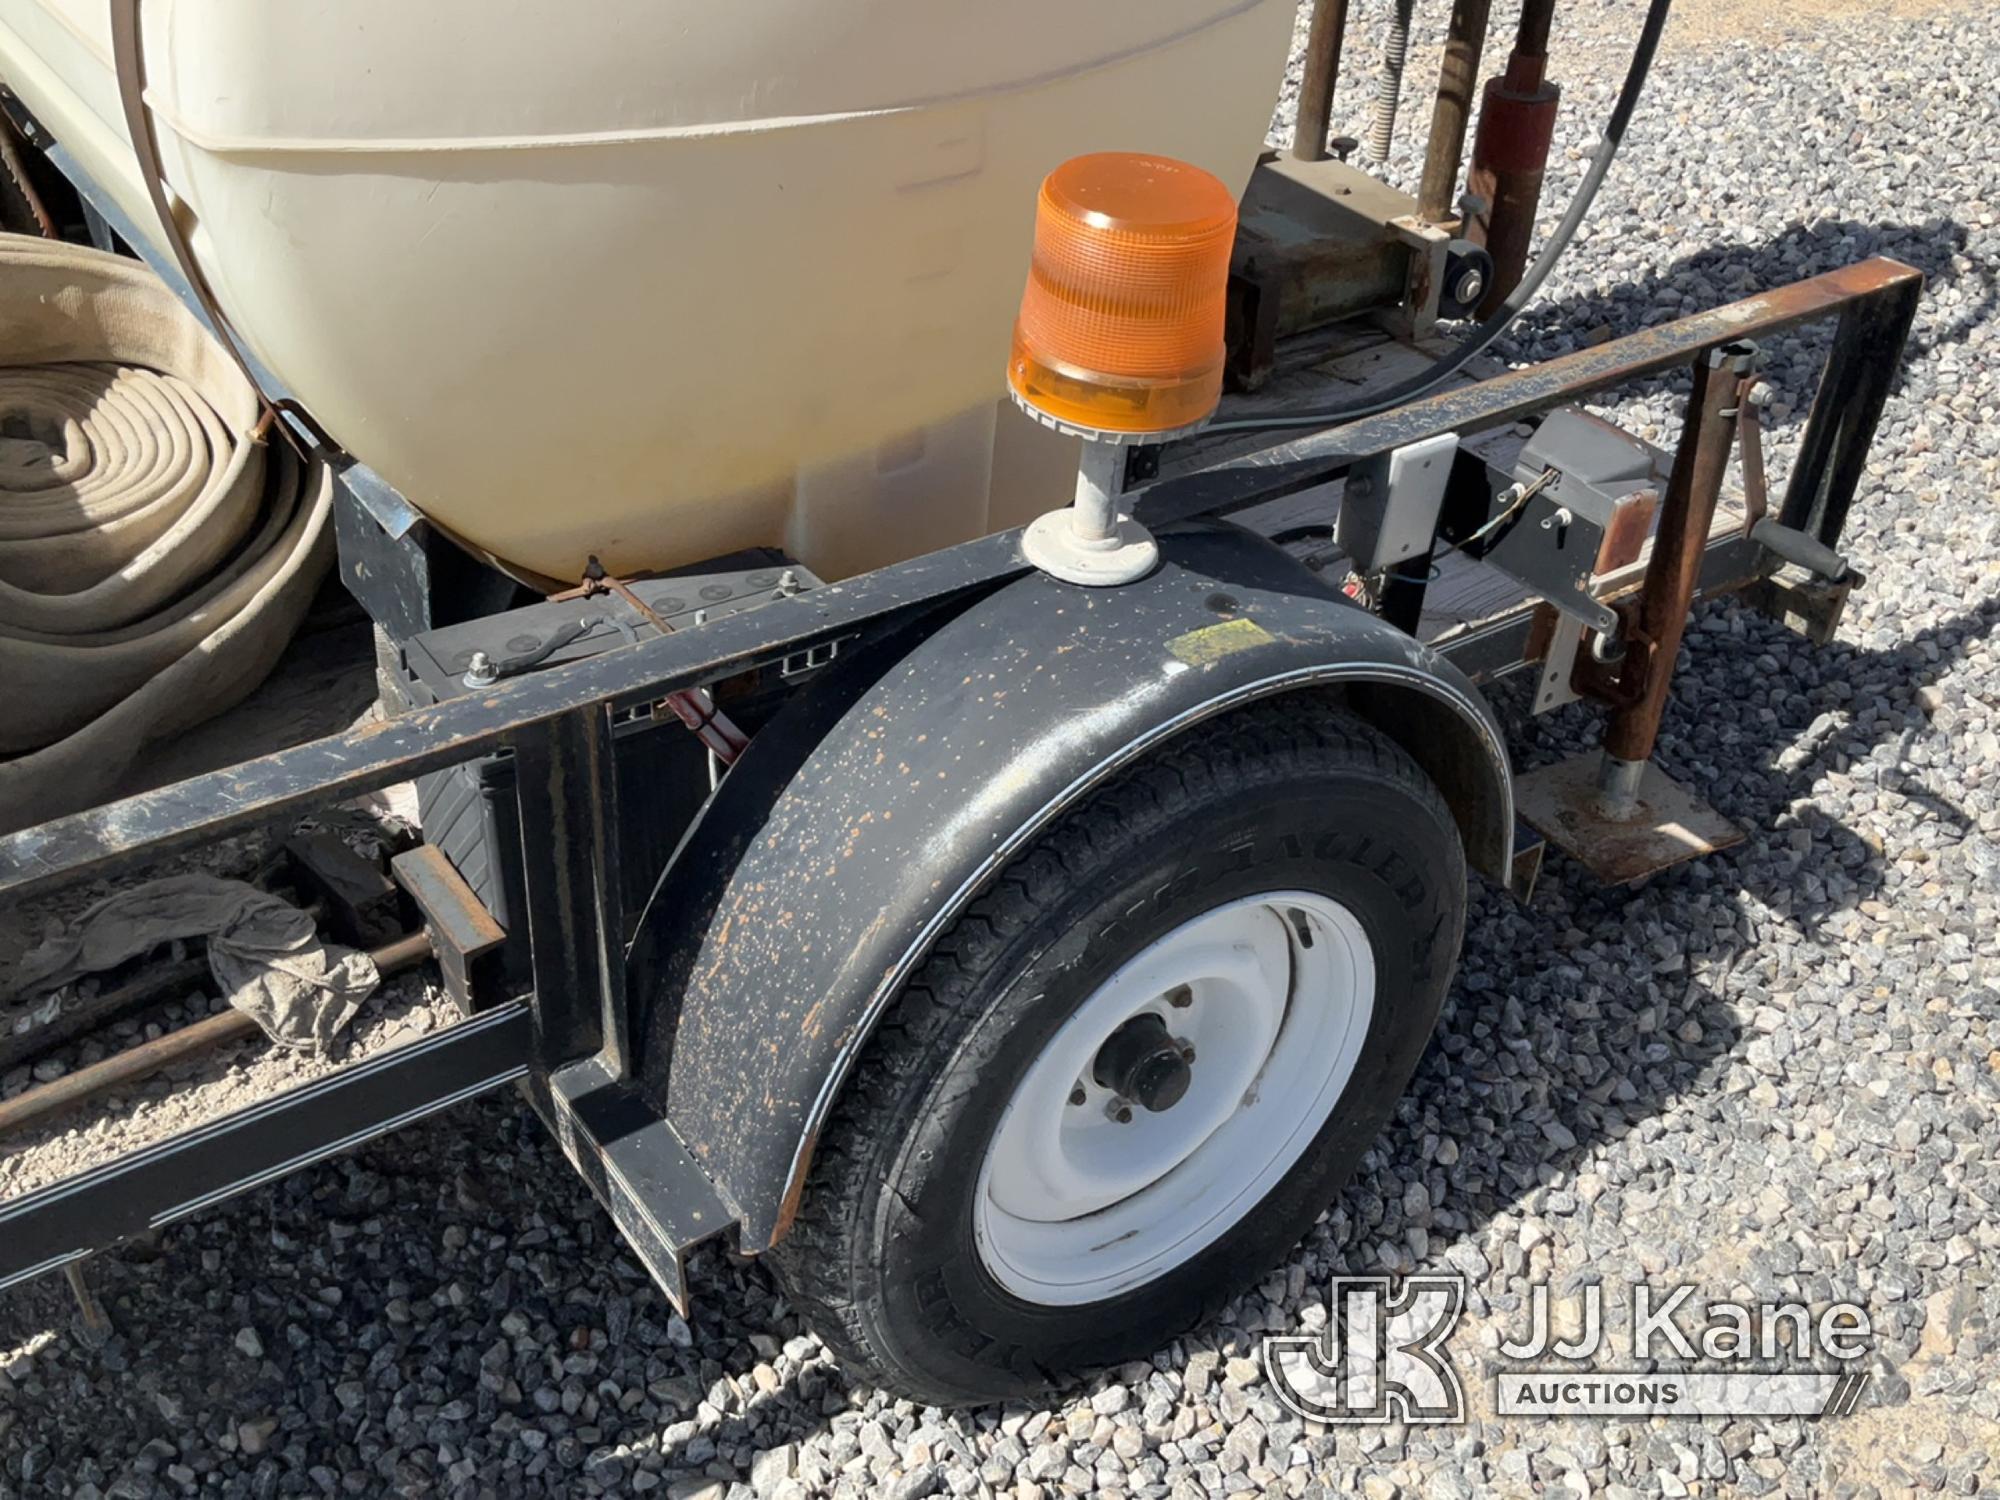 (Las Vegas, NV) 1994 Big Tex Flatbed Trailer 2 In. Ball, Deck 8 Ft. 3 In. Long, 5 Ft. Wide Bad Tires